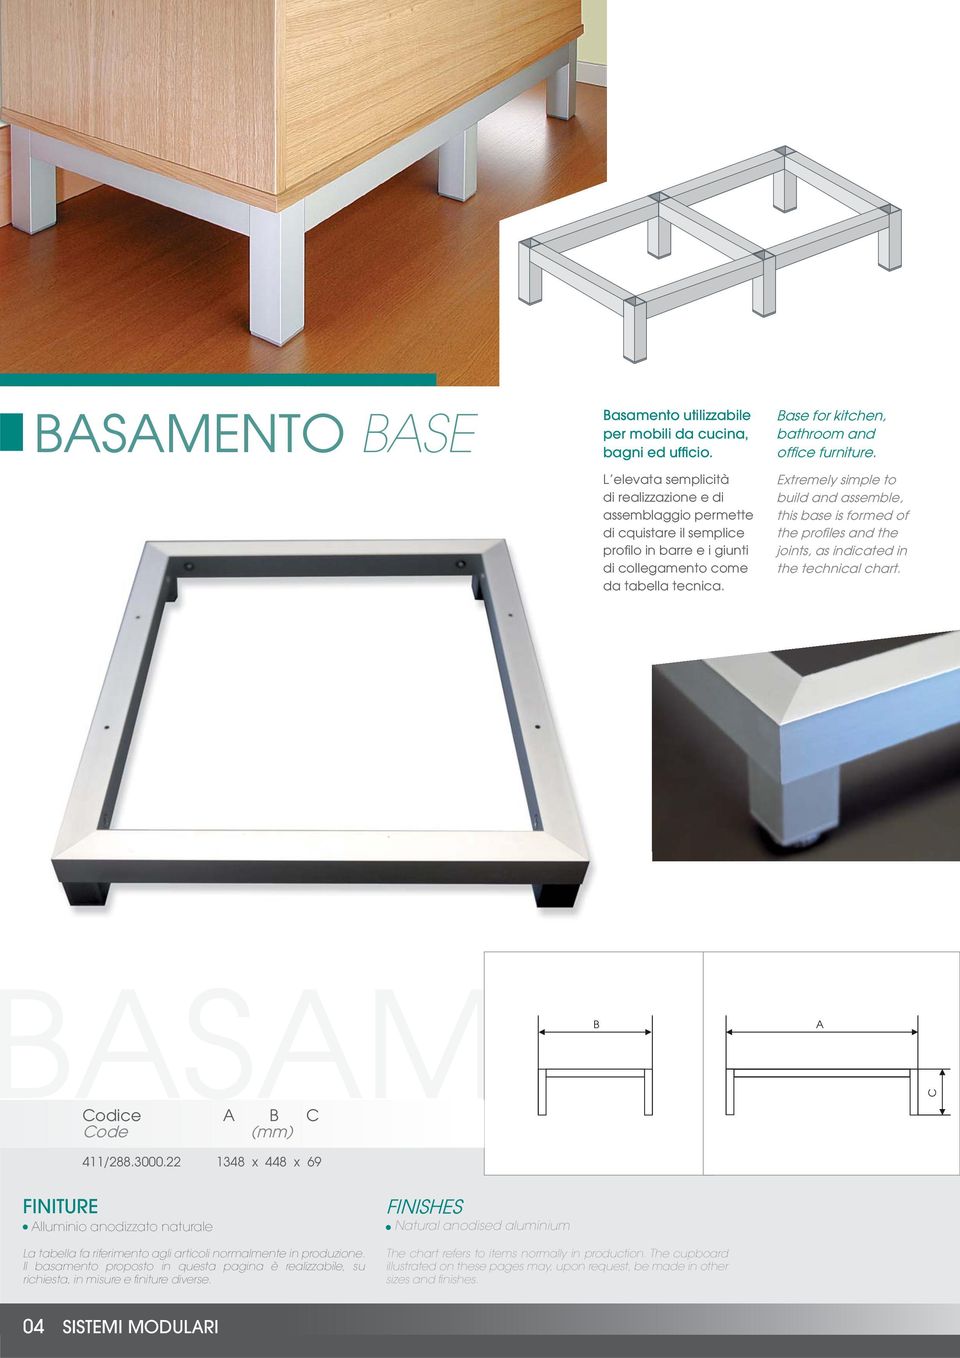 Base for kitchen, bathroom and offi ce furniture. Extremely simple to build and assemble, this base is formed of the profi les and the joints, as indicated in the technical chart.